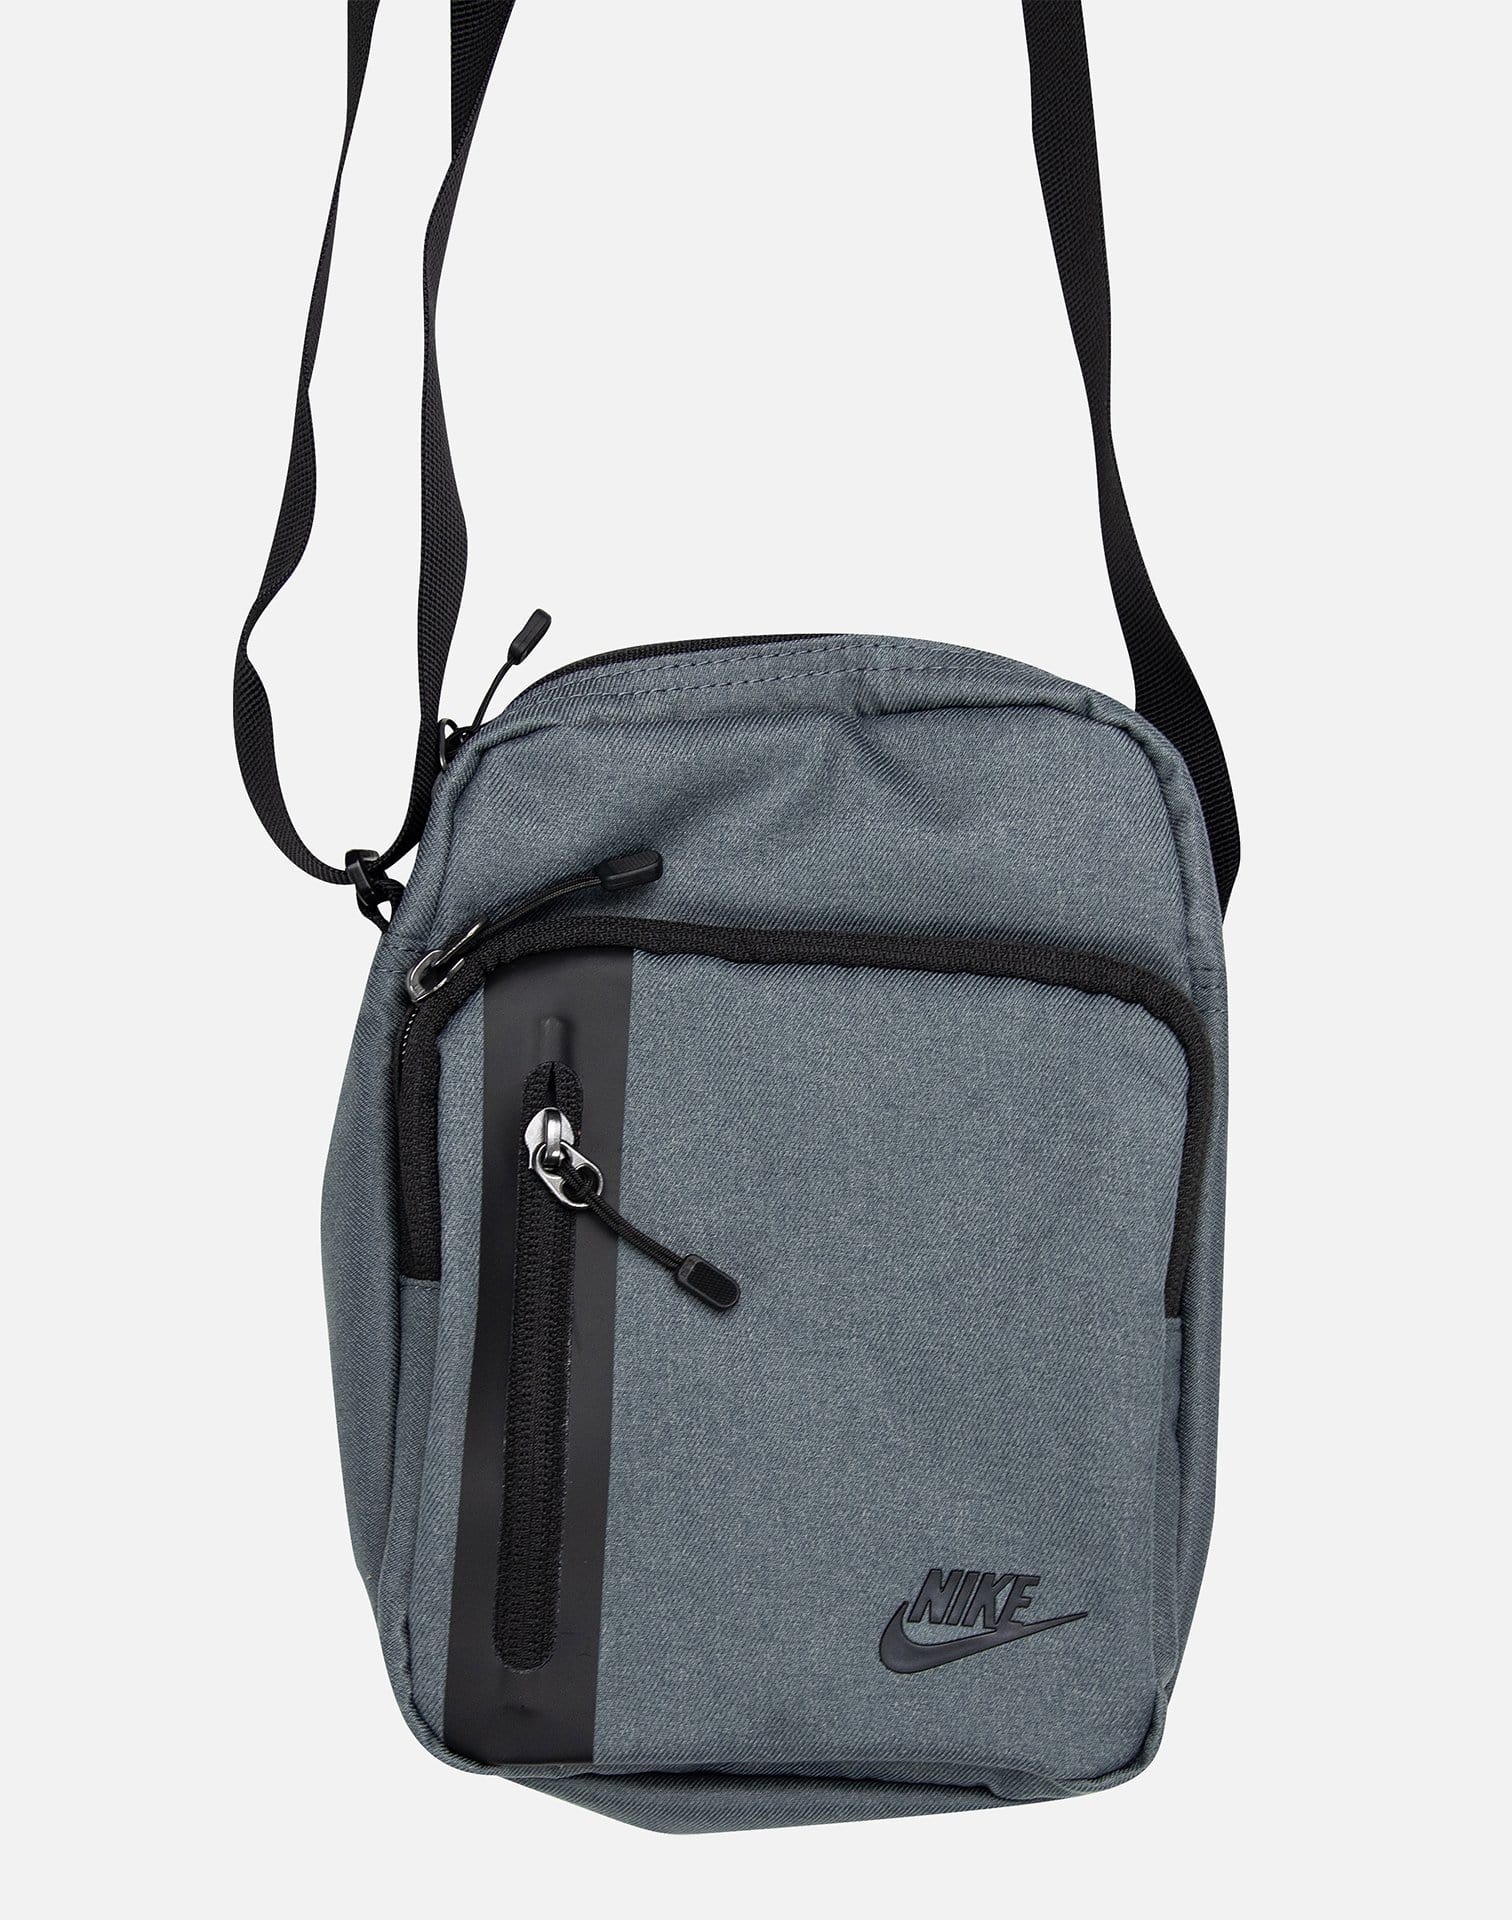 Nike CORE ITEMS 3.0 BAG – DTLR